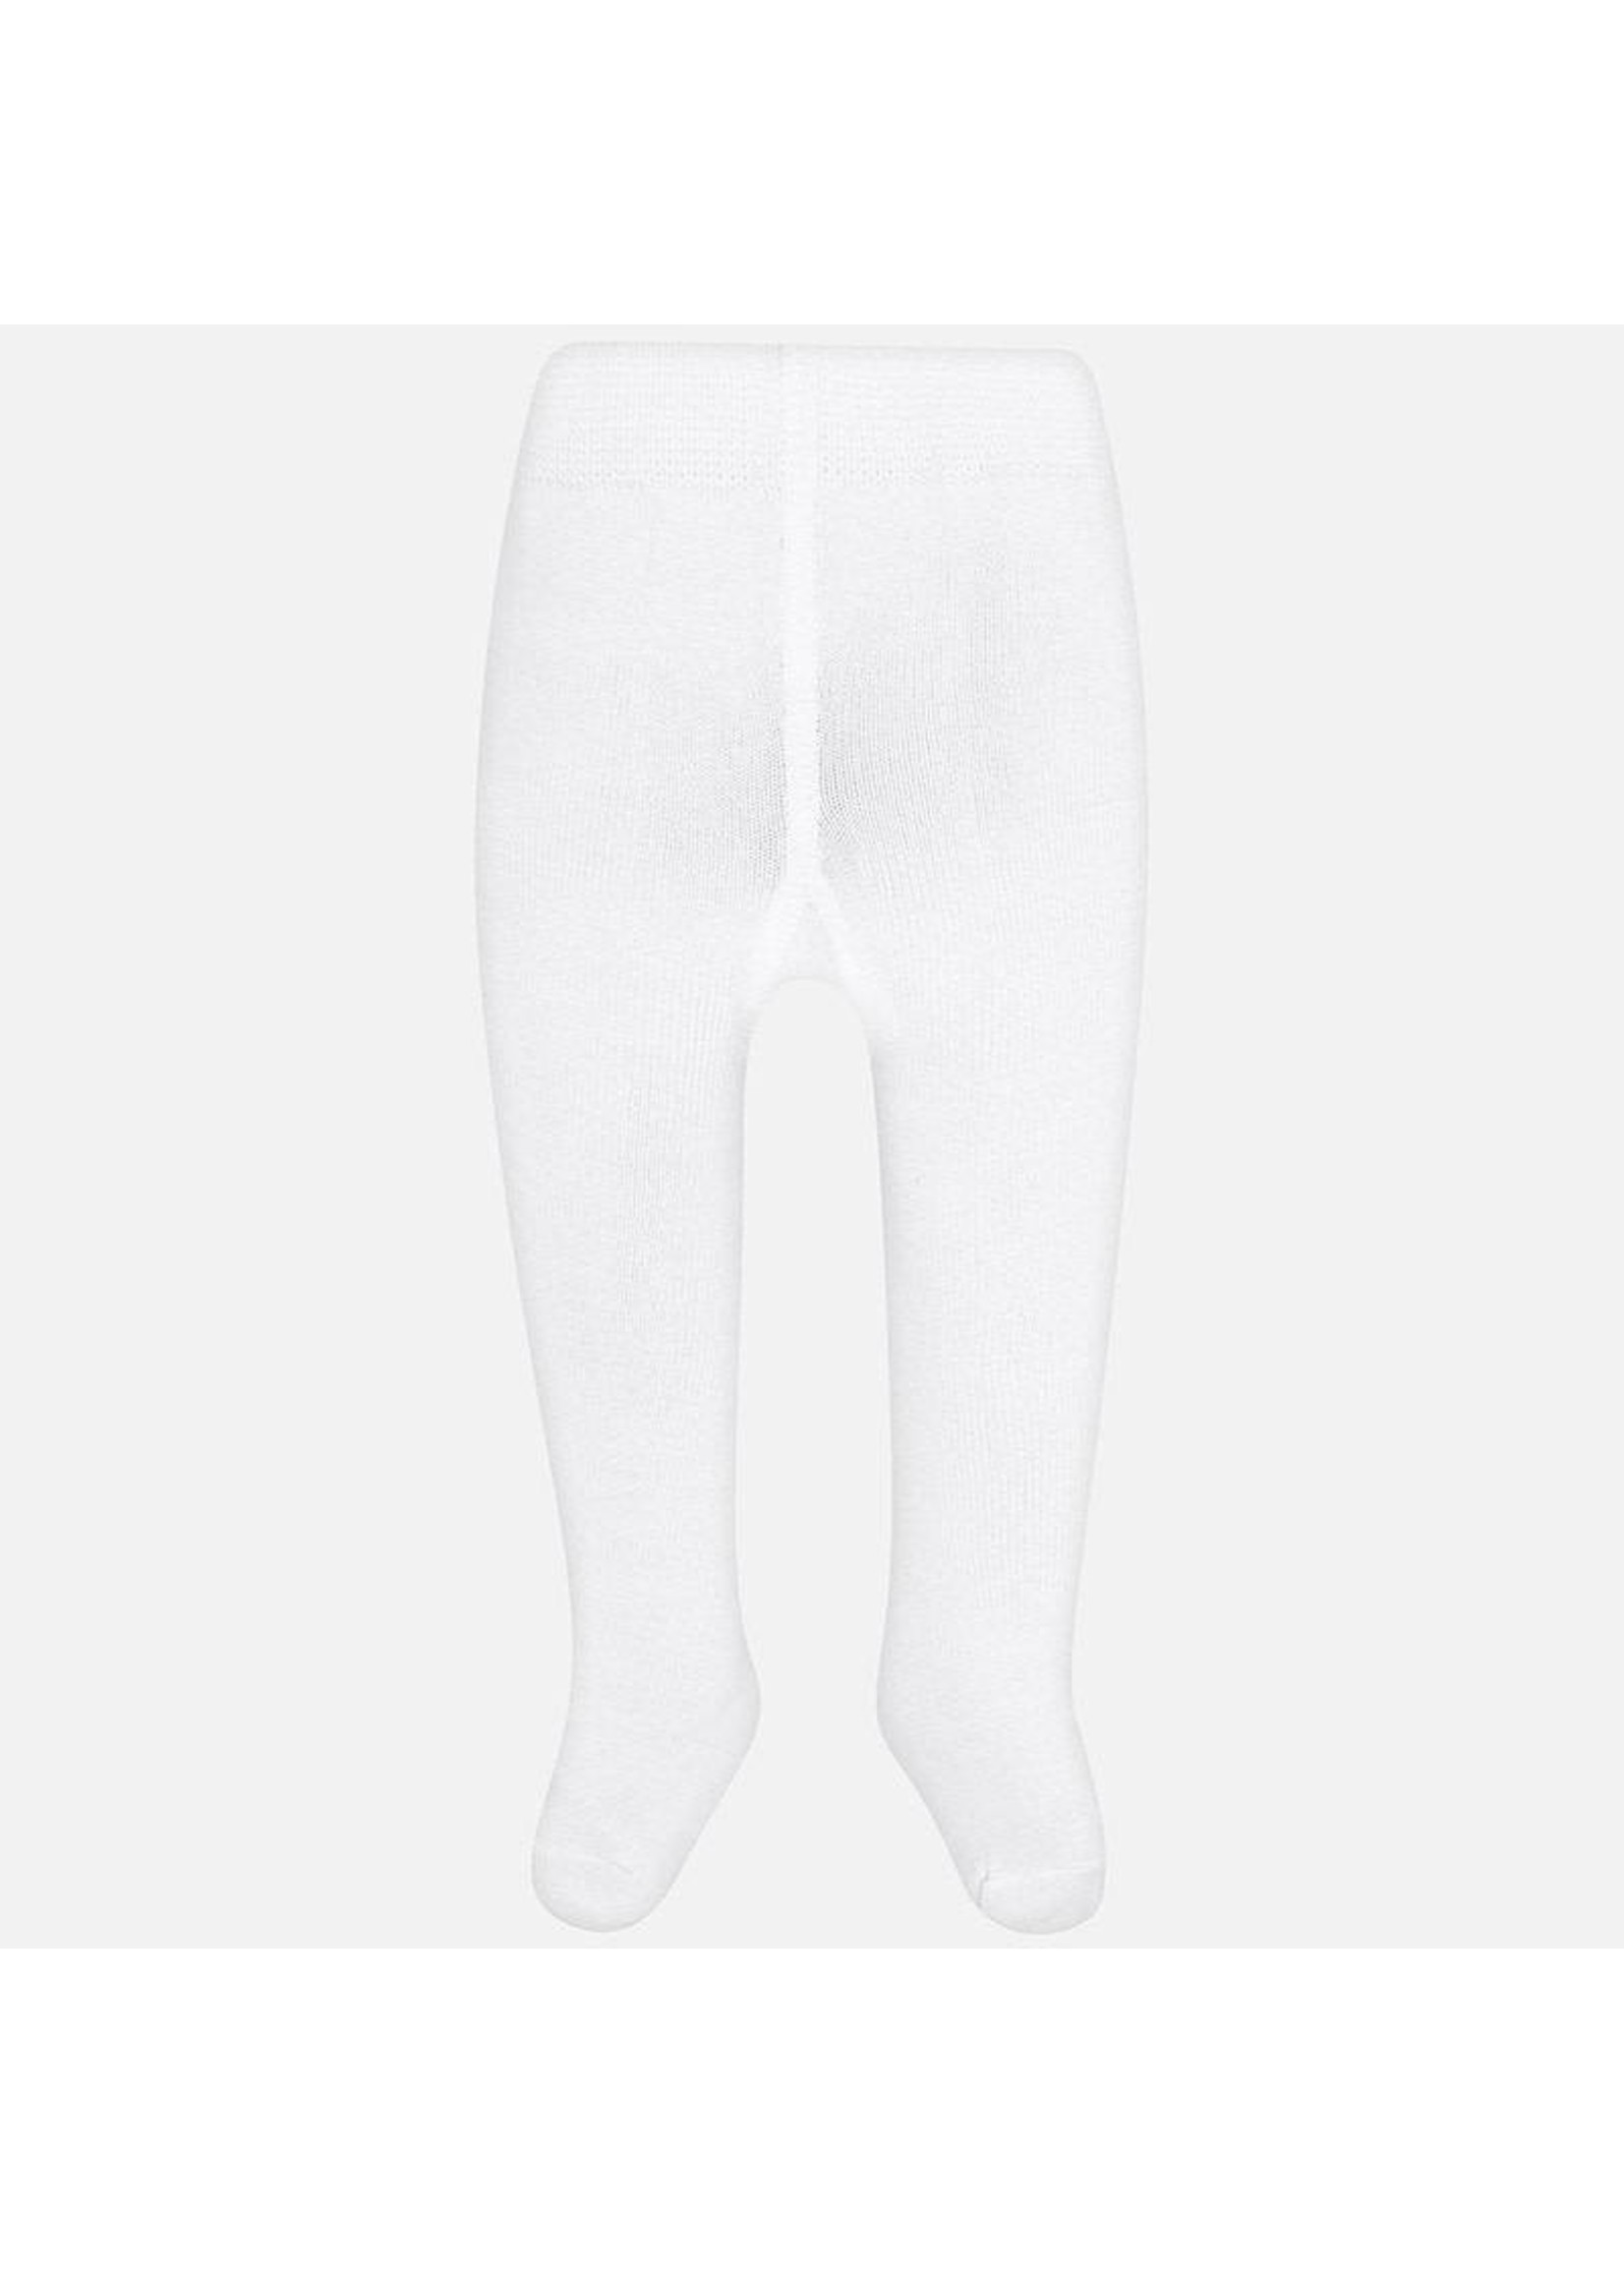 Mayoral Mayoral Tights White-3